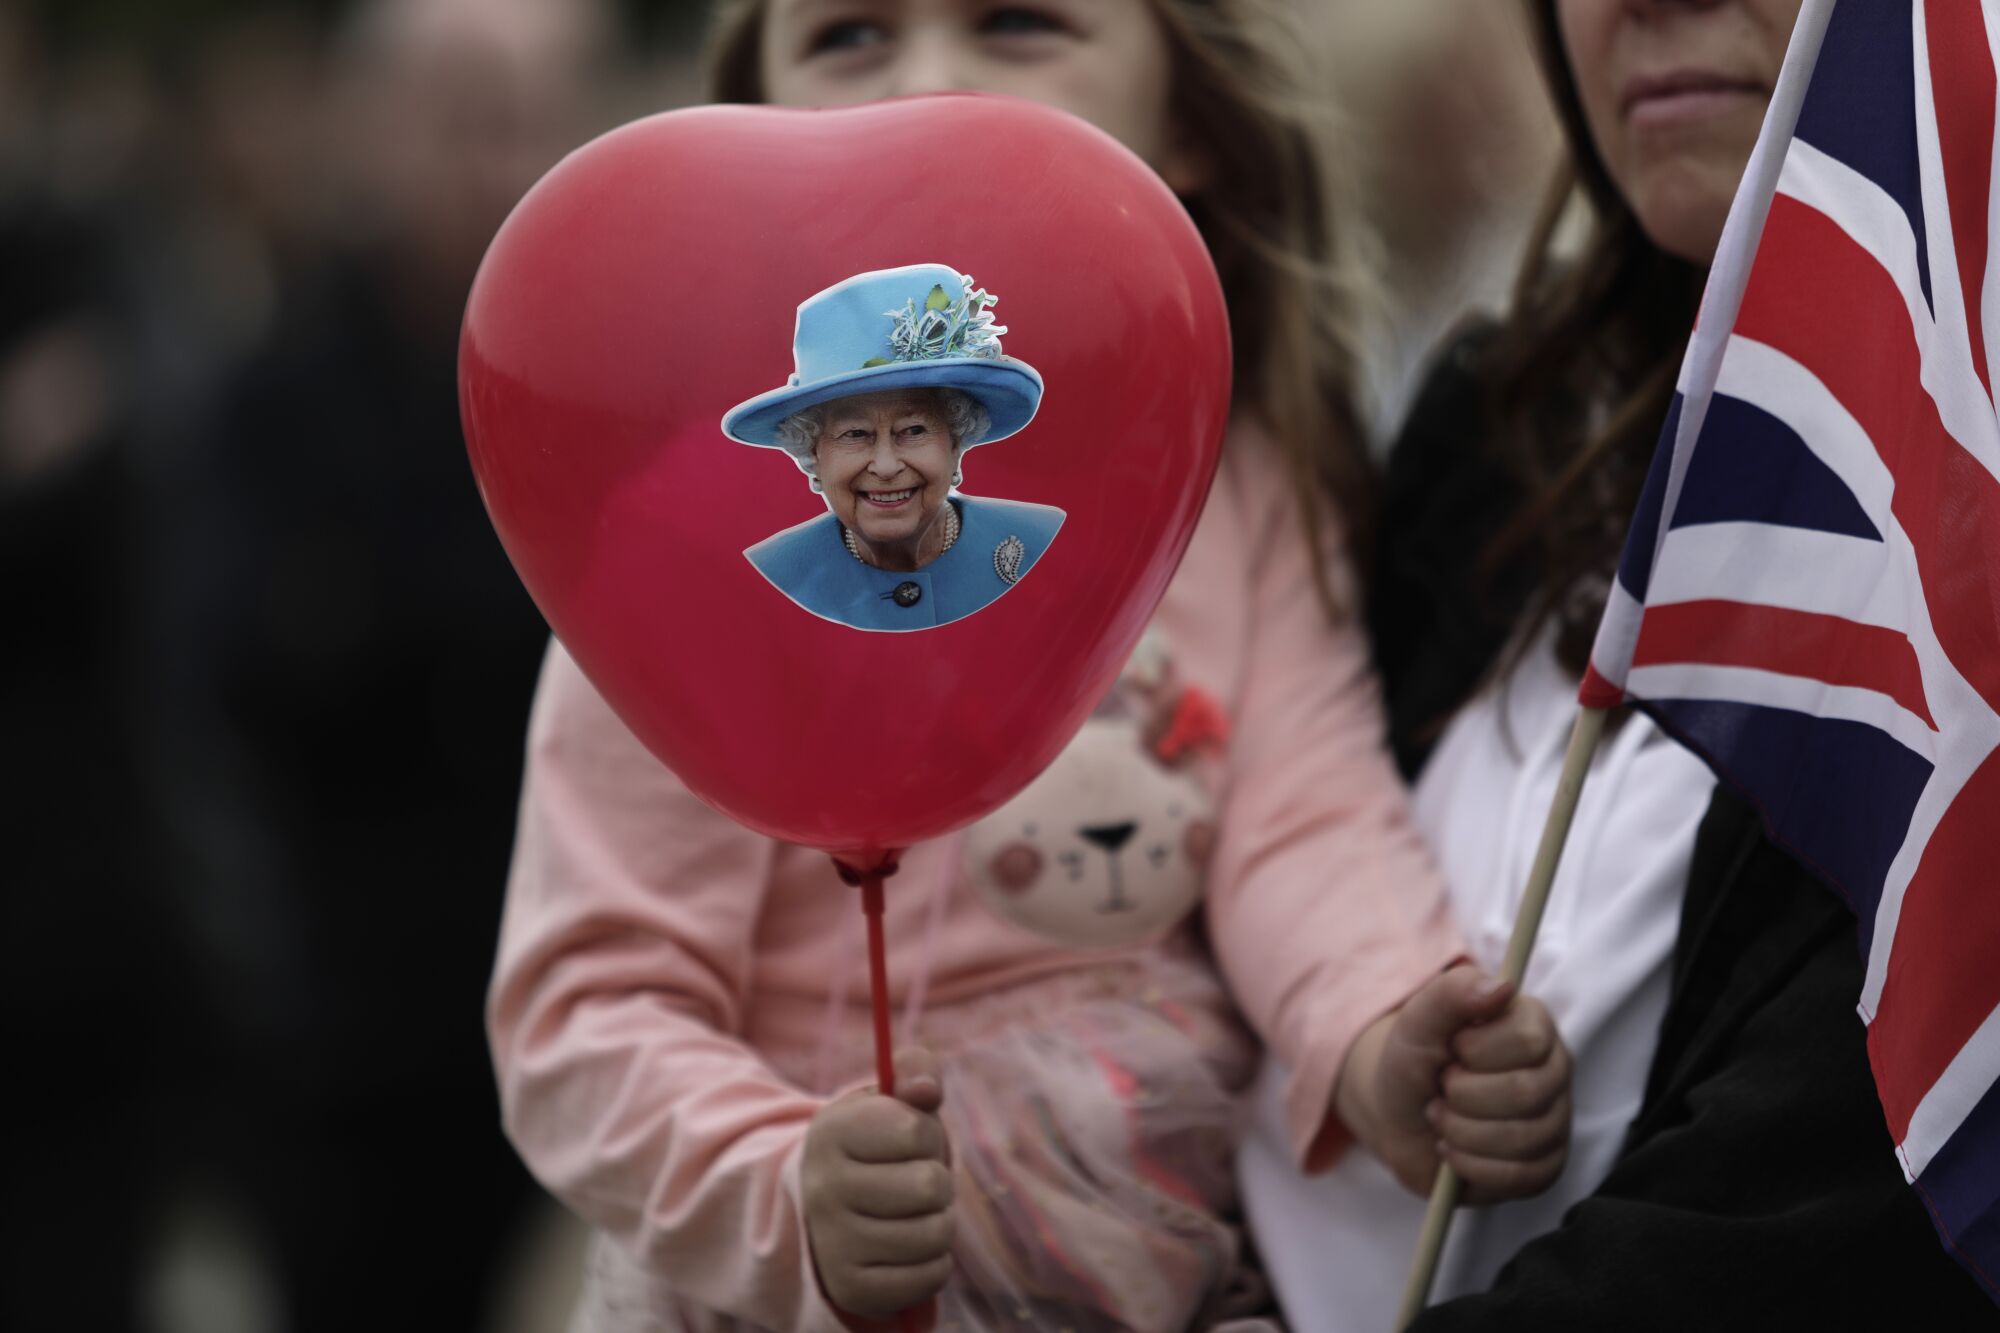 A girl holds a balloon with the Queen's picture and a Union Jack flag.